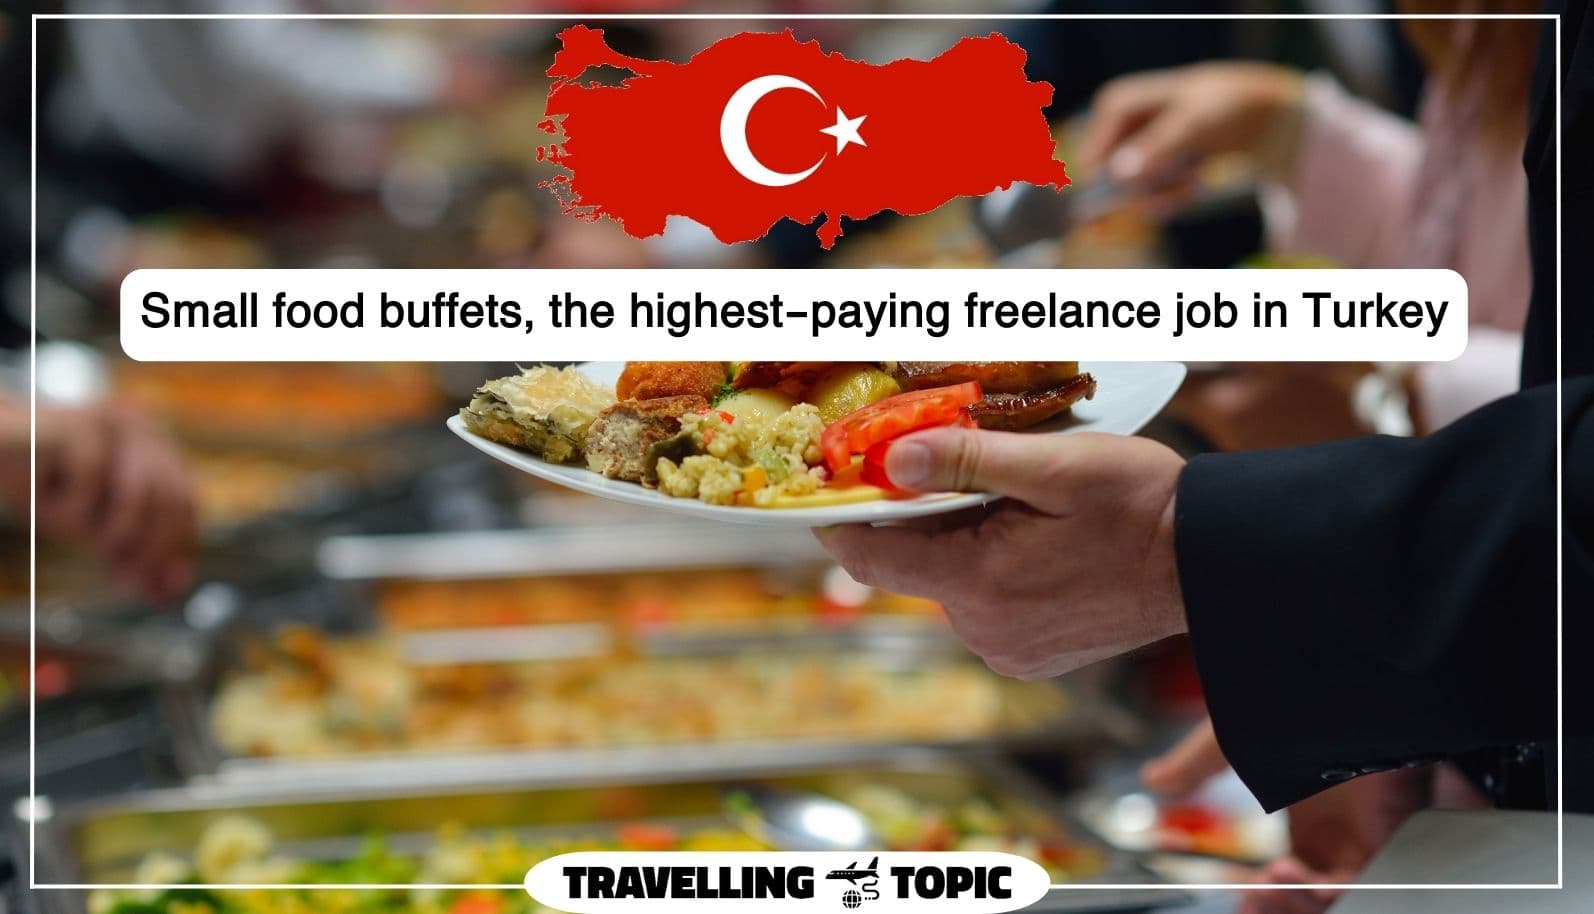 Small food buffets, the highest-paying freelance job in Turkey